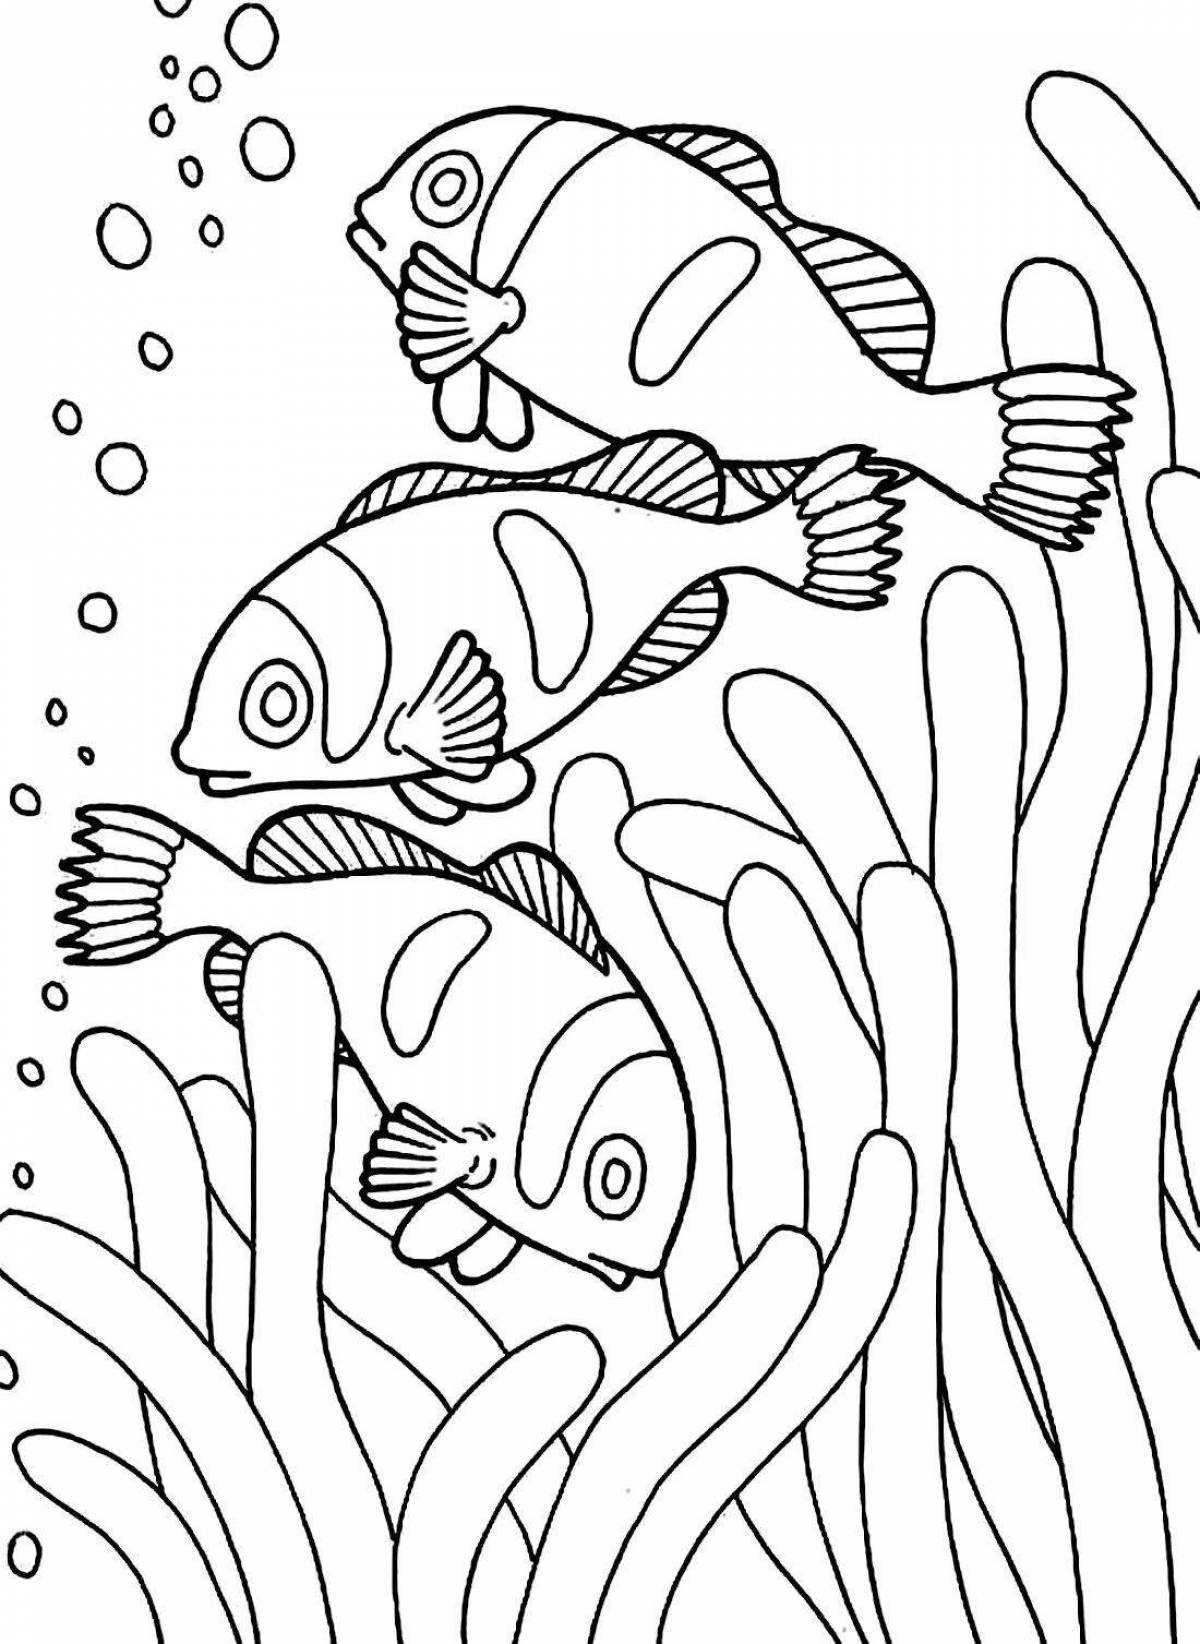 Coloring book shining underwater world